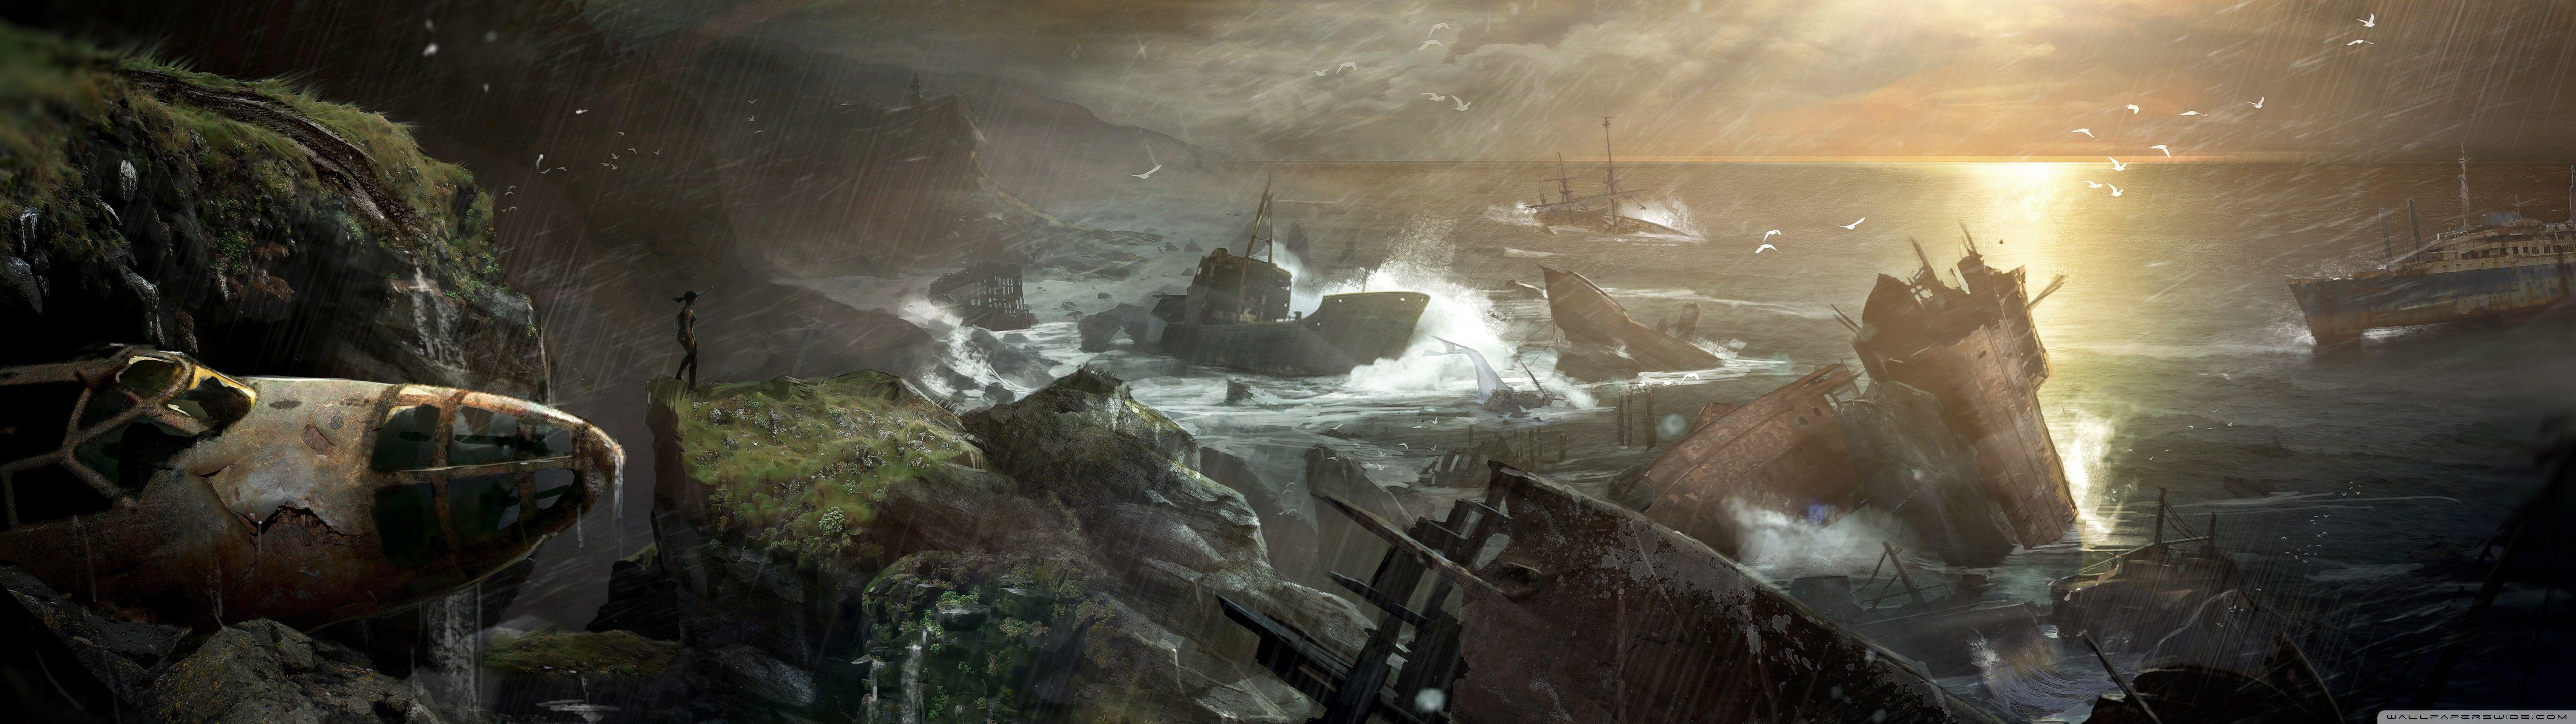 2560x1440 wallpaper the sinking ship in the stormy sea - 5120x1440